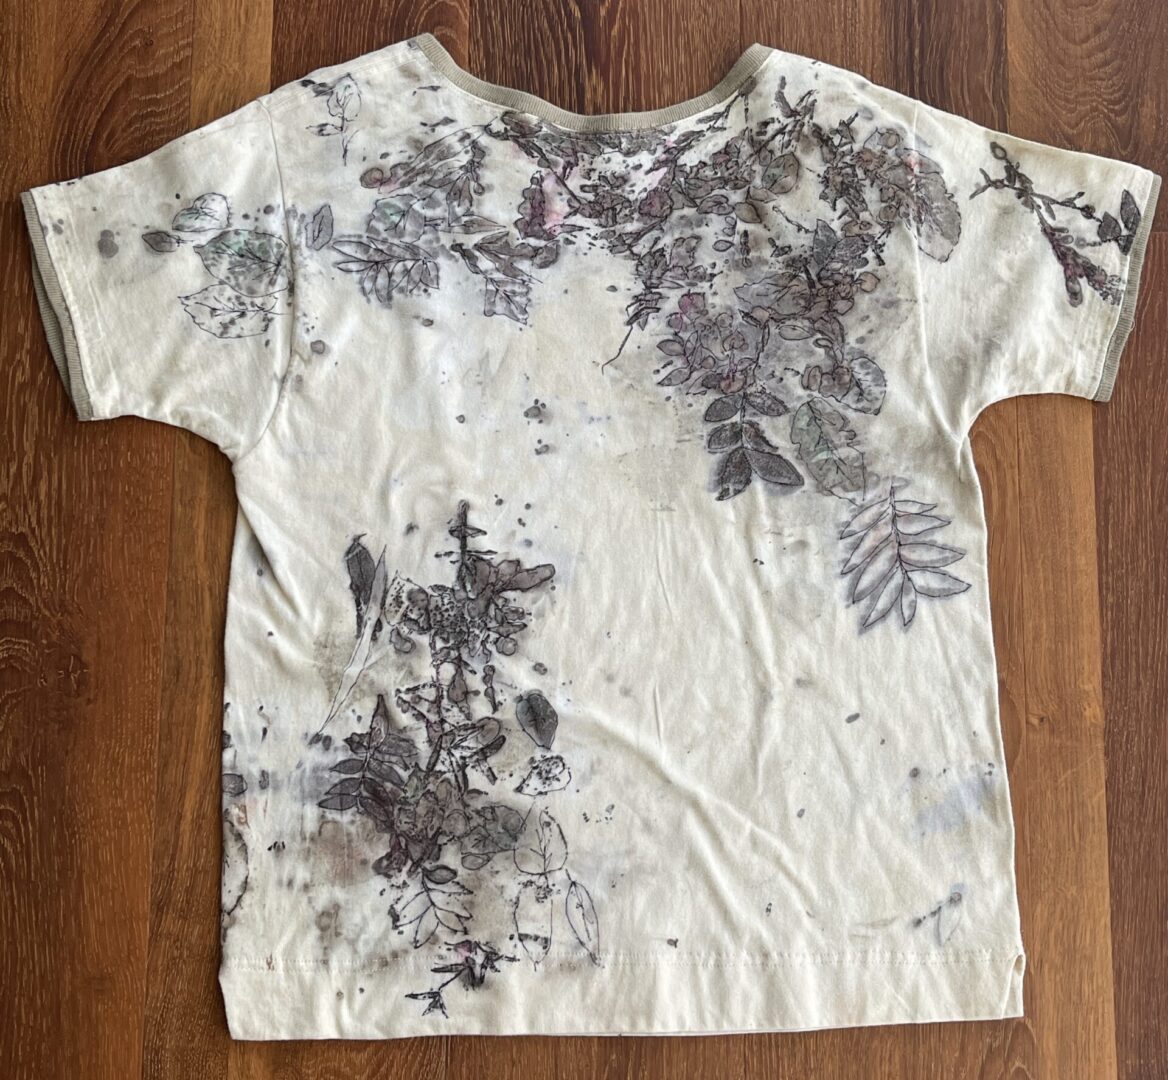 A white shirt with some black and brown leaves on it